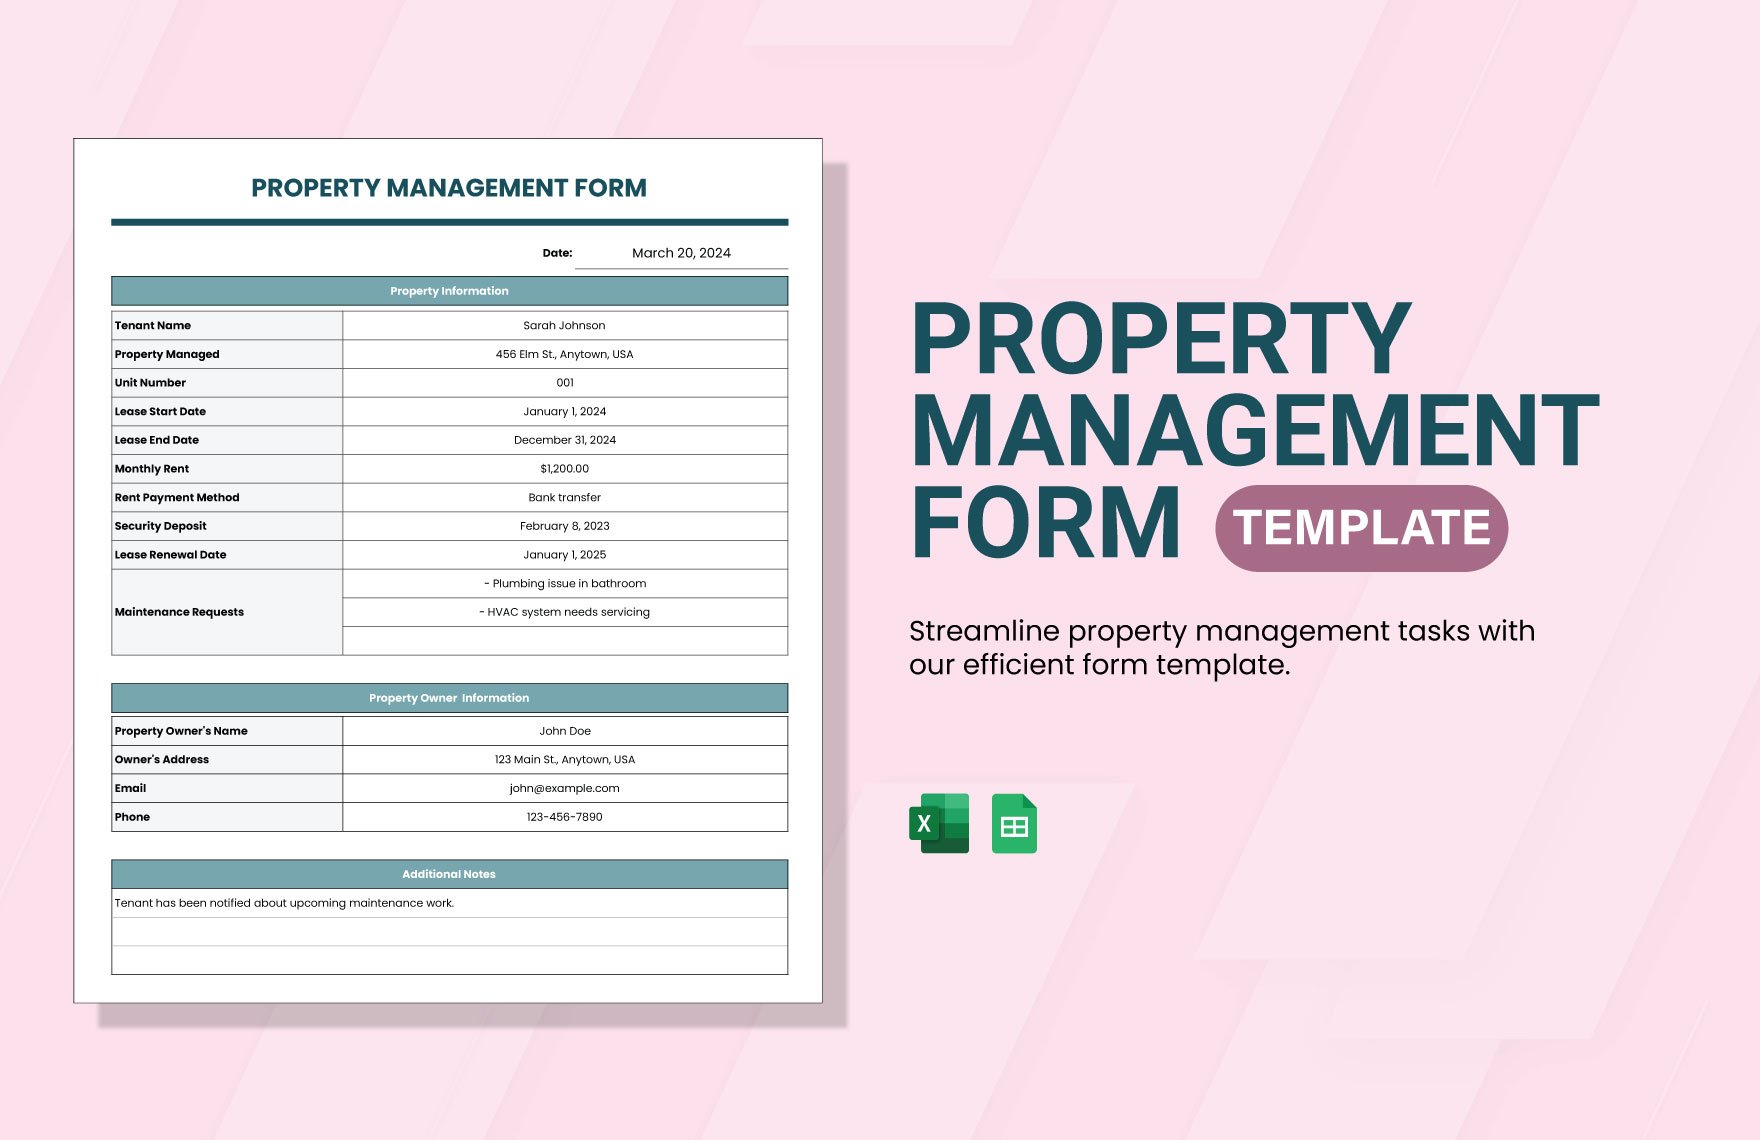 Property Management Form Template in Excel, Google Sheets